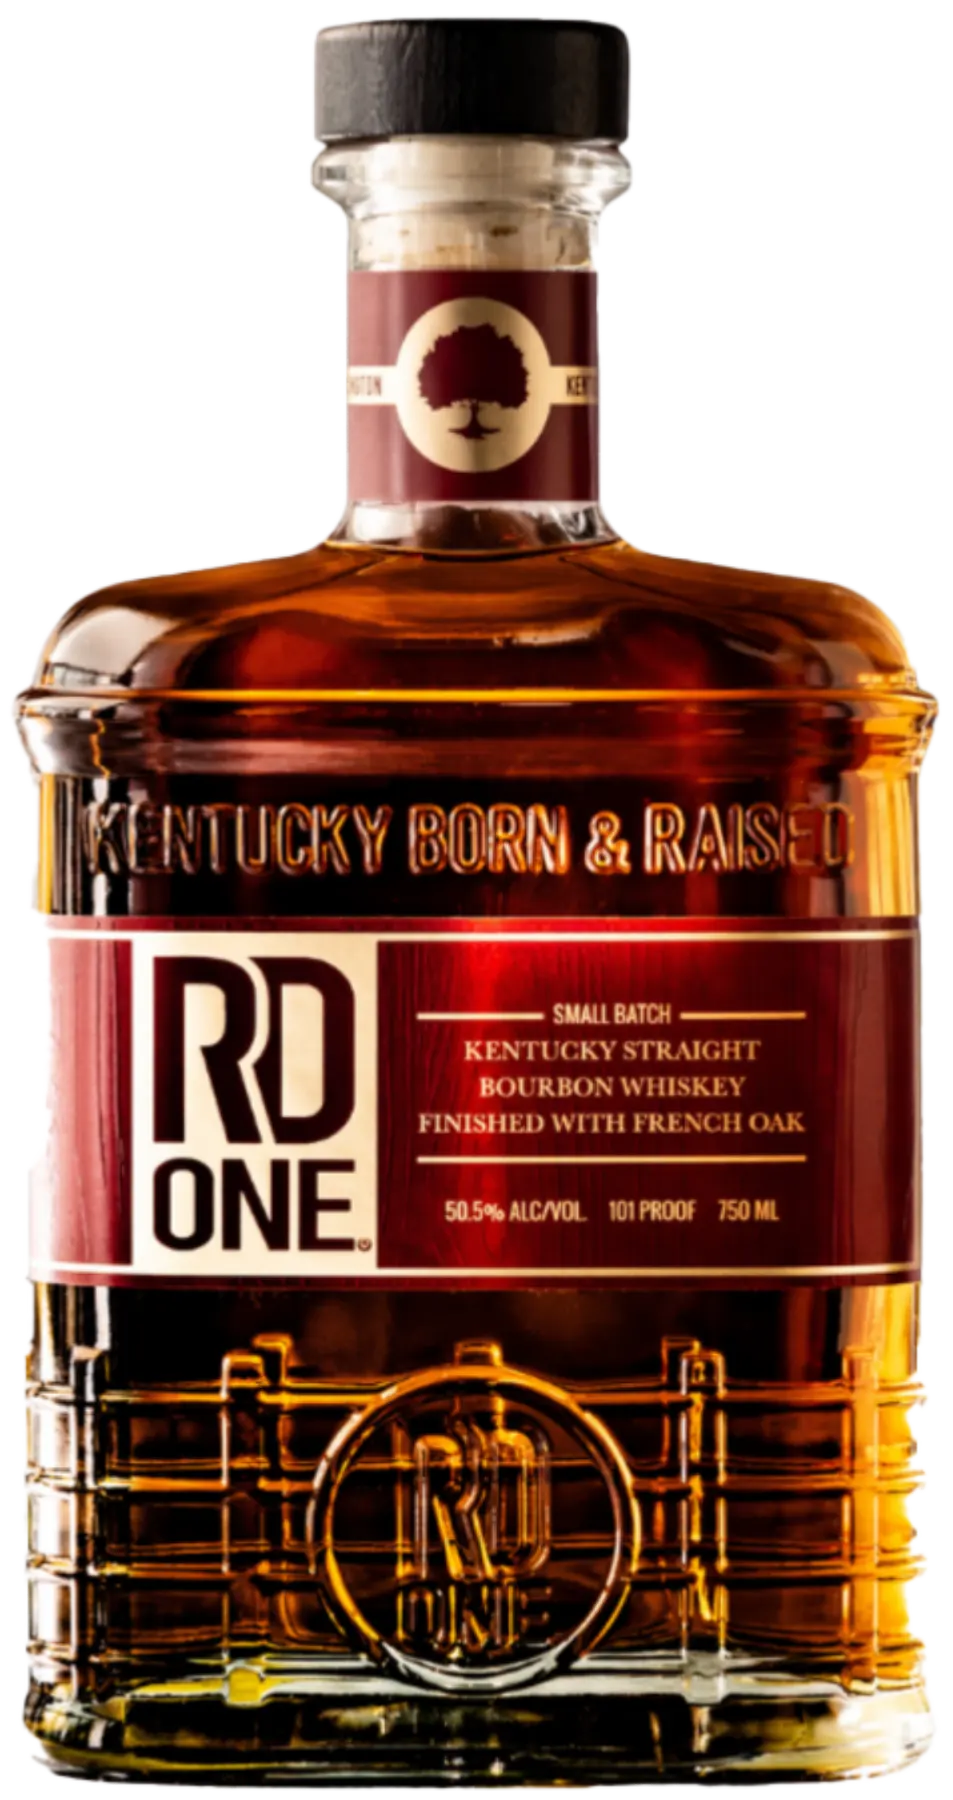 RD1 &quot;French Oak Finish&quot; Kentucky Straight Bourbon Whiskey (RD One)